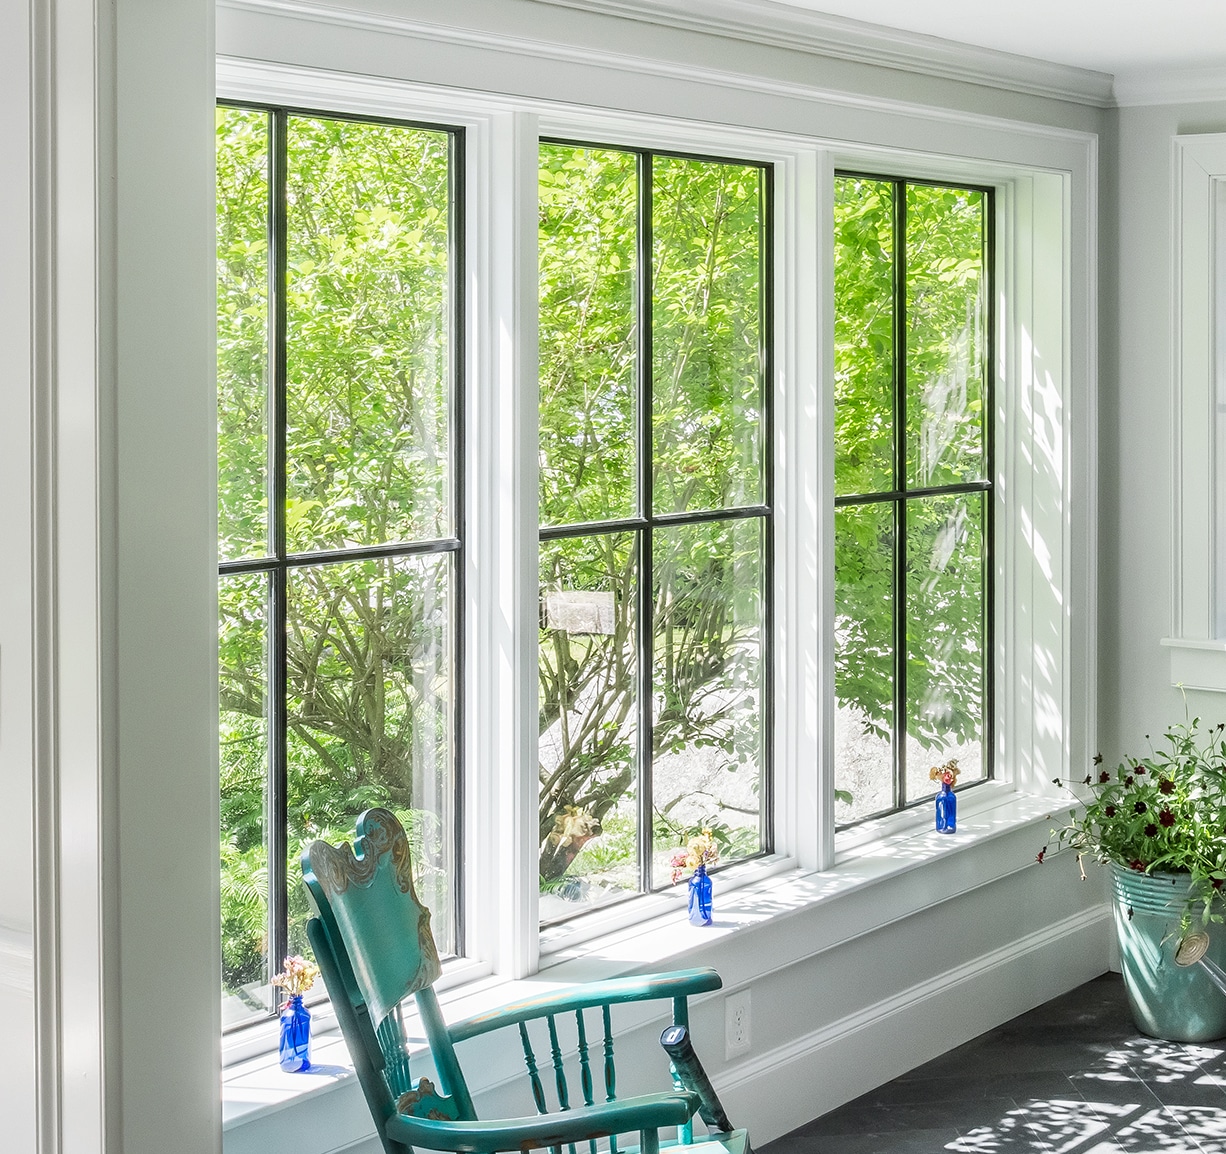 56 Window Treatment Ideas for Every Budget and Space